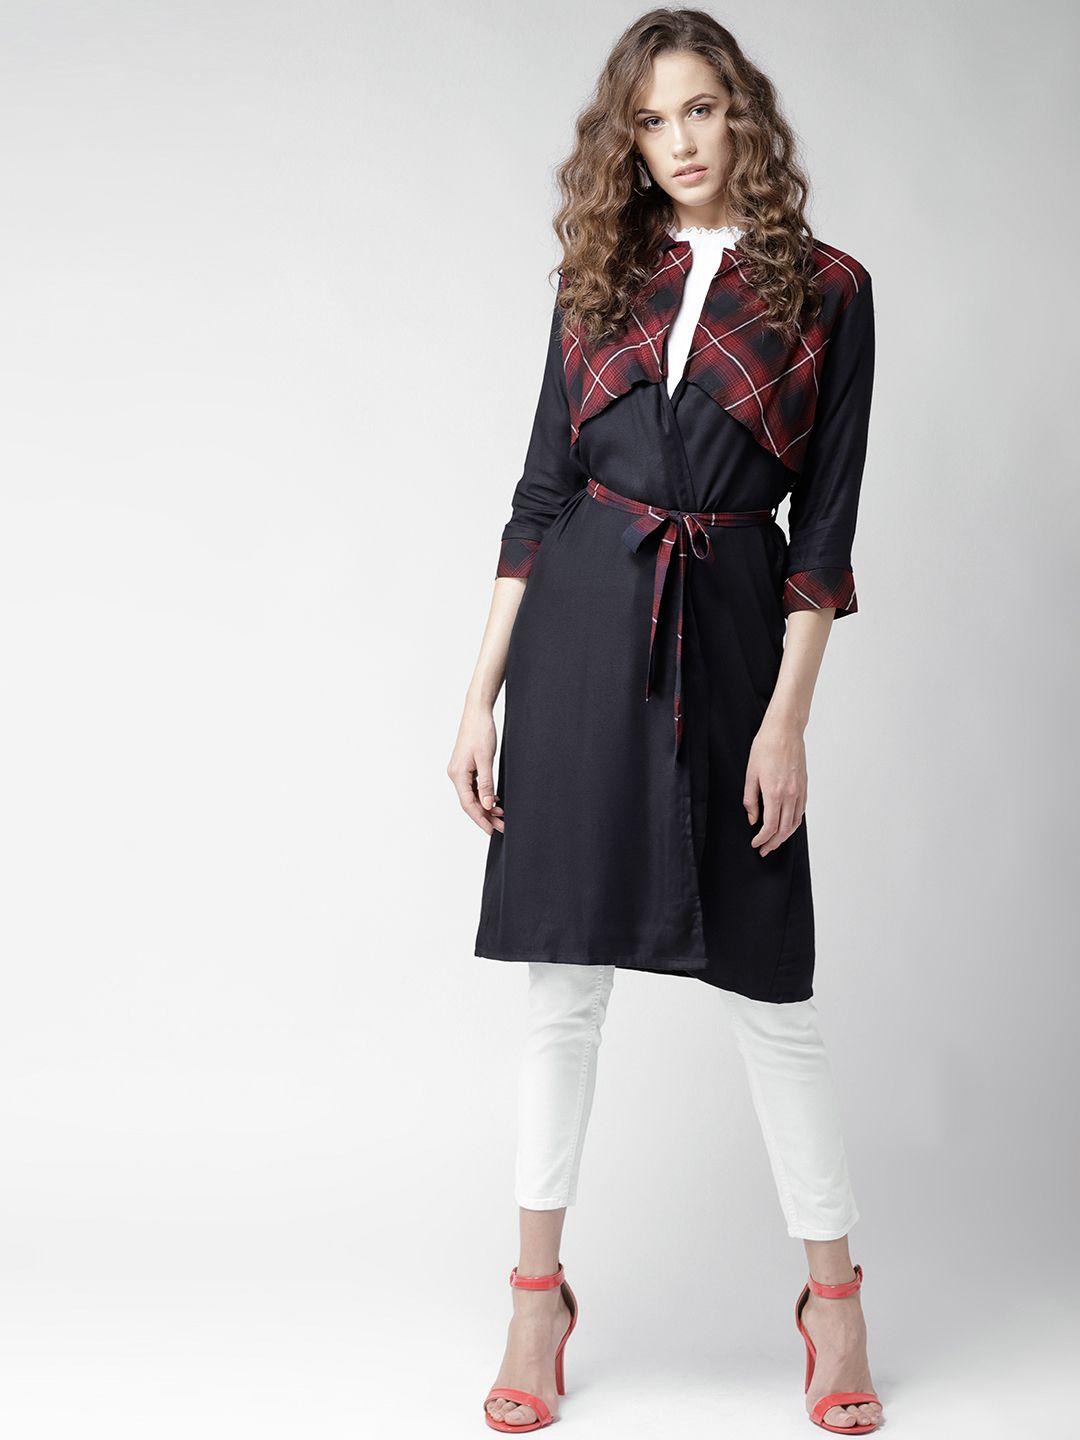 style quotient by noi navy blue & red solid layered open front longline shrug